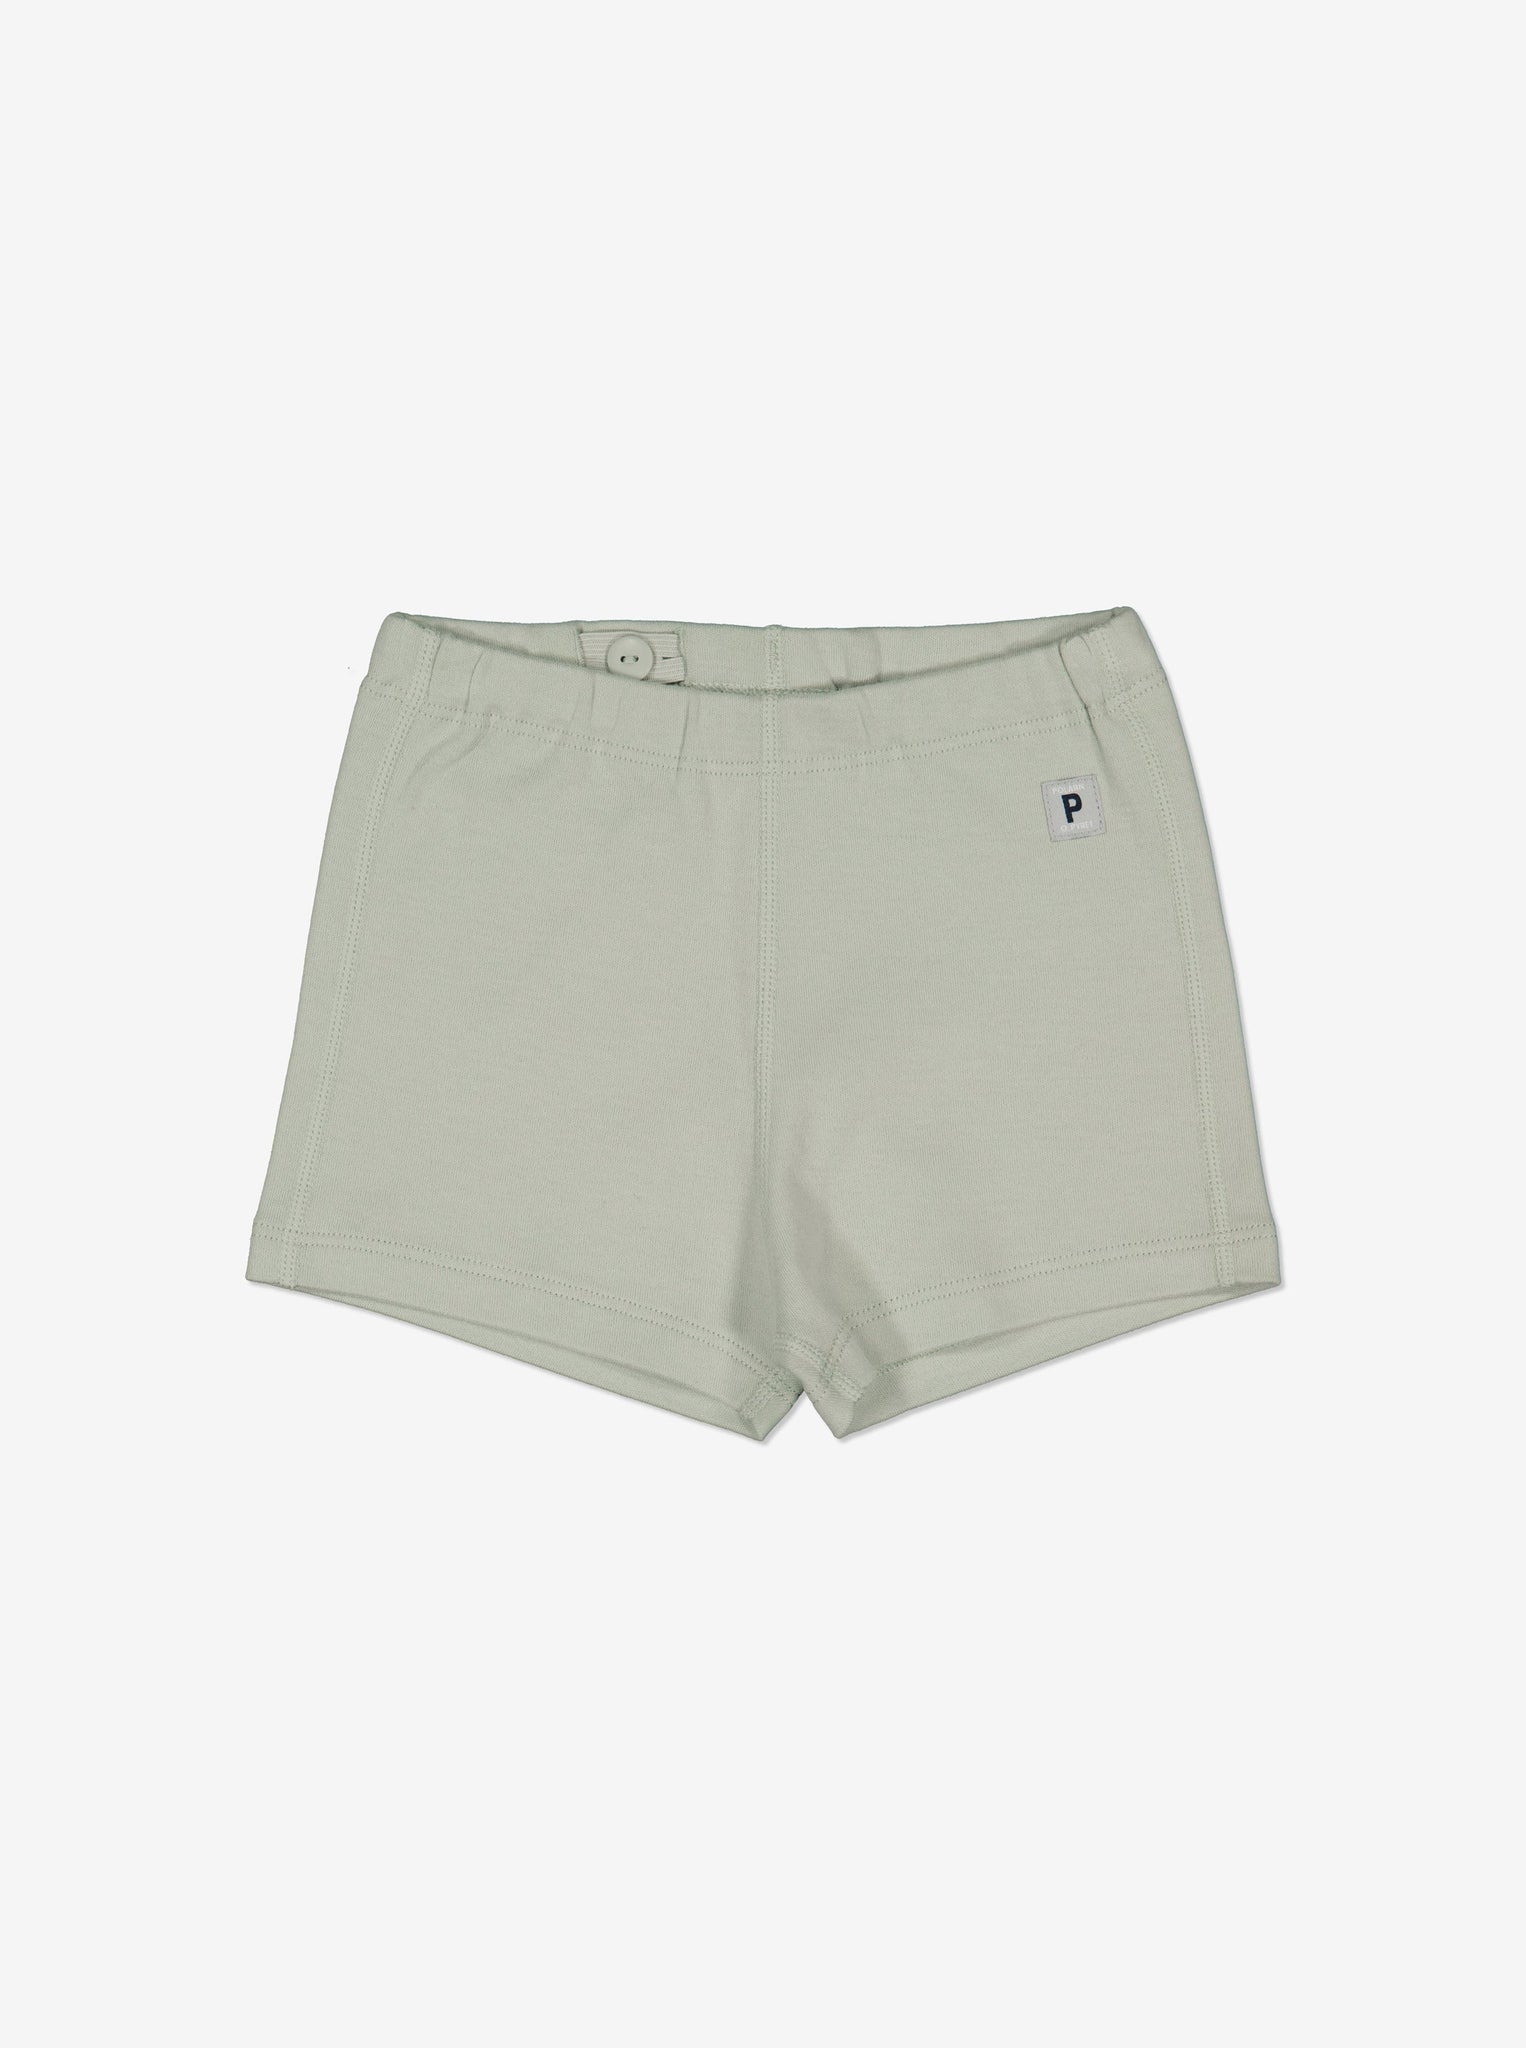 Organic Cotton Green  Baby Shorts from Polarn O. Pyret Kidswear. Made from ethically sourced materials.